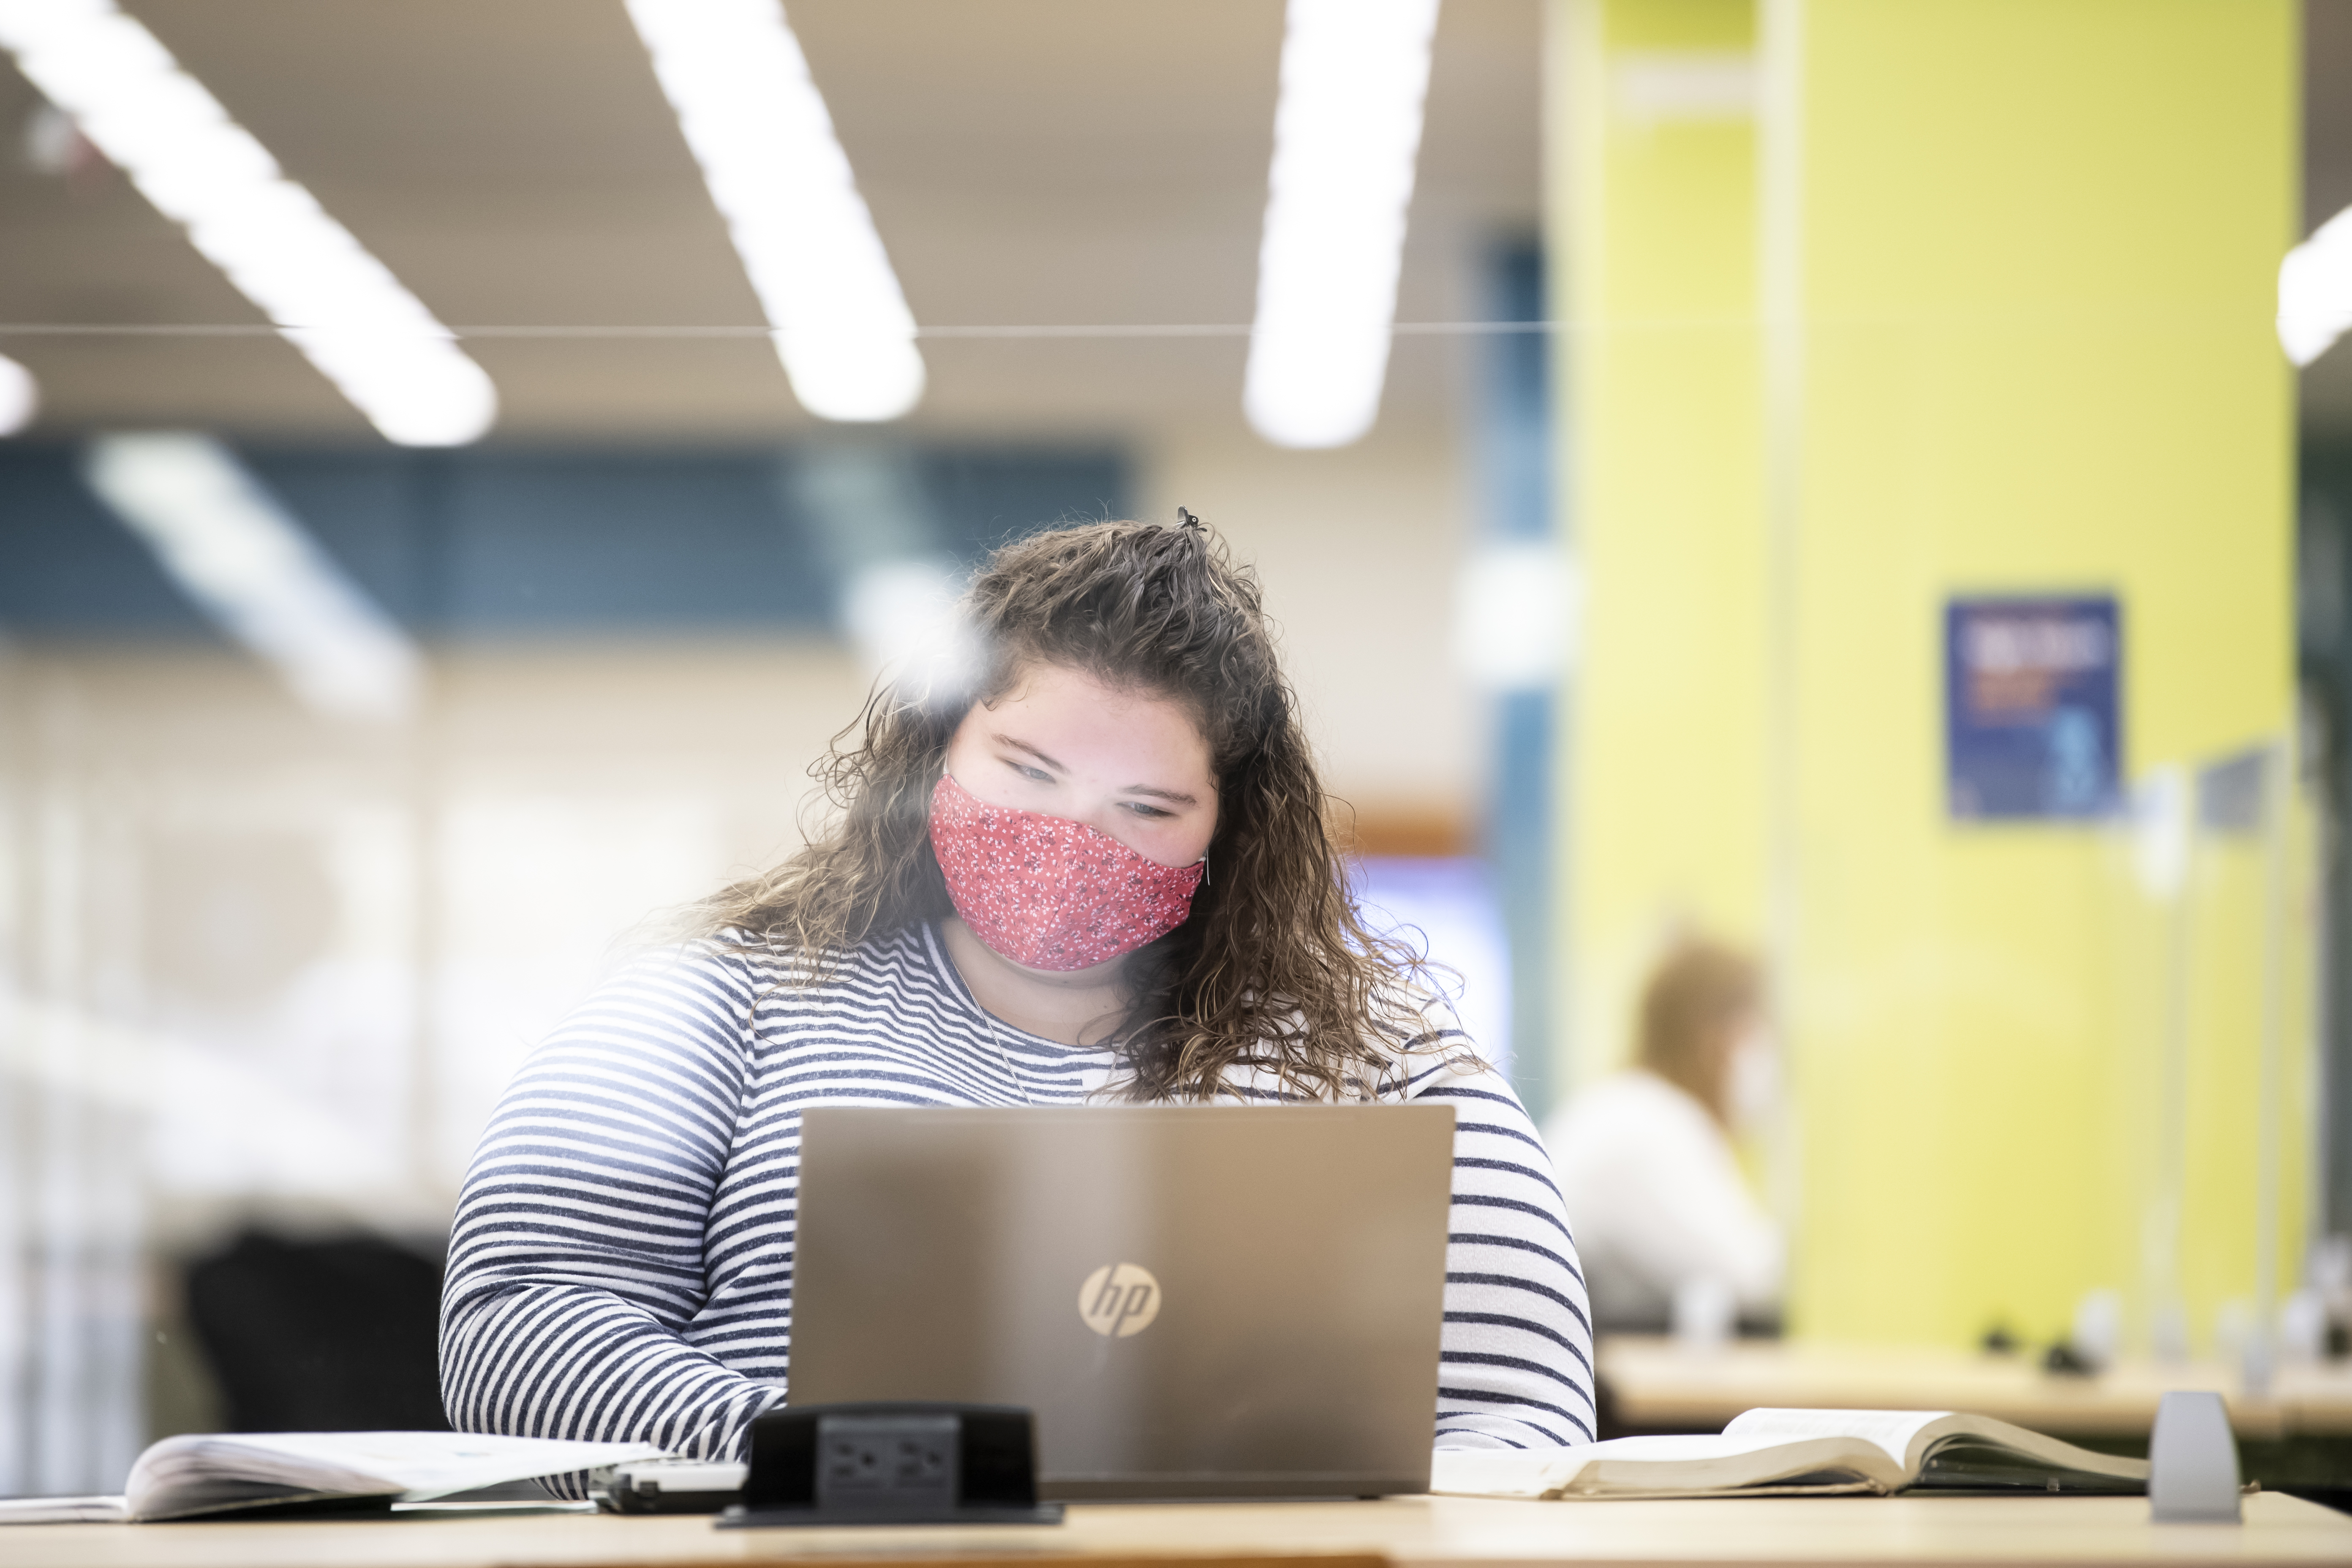 A woman wearing a fabric mask with brown curly hair is typing on her laptop.